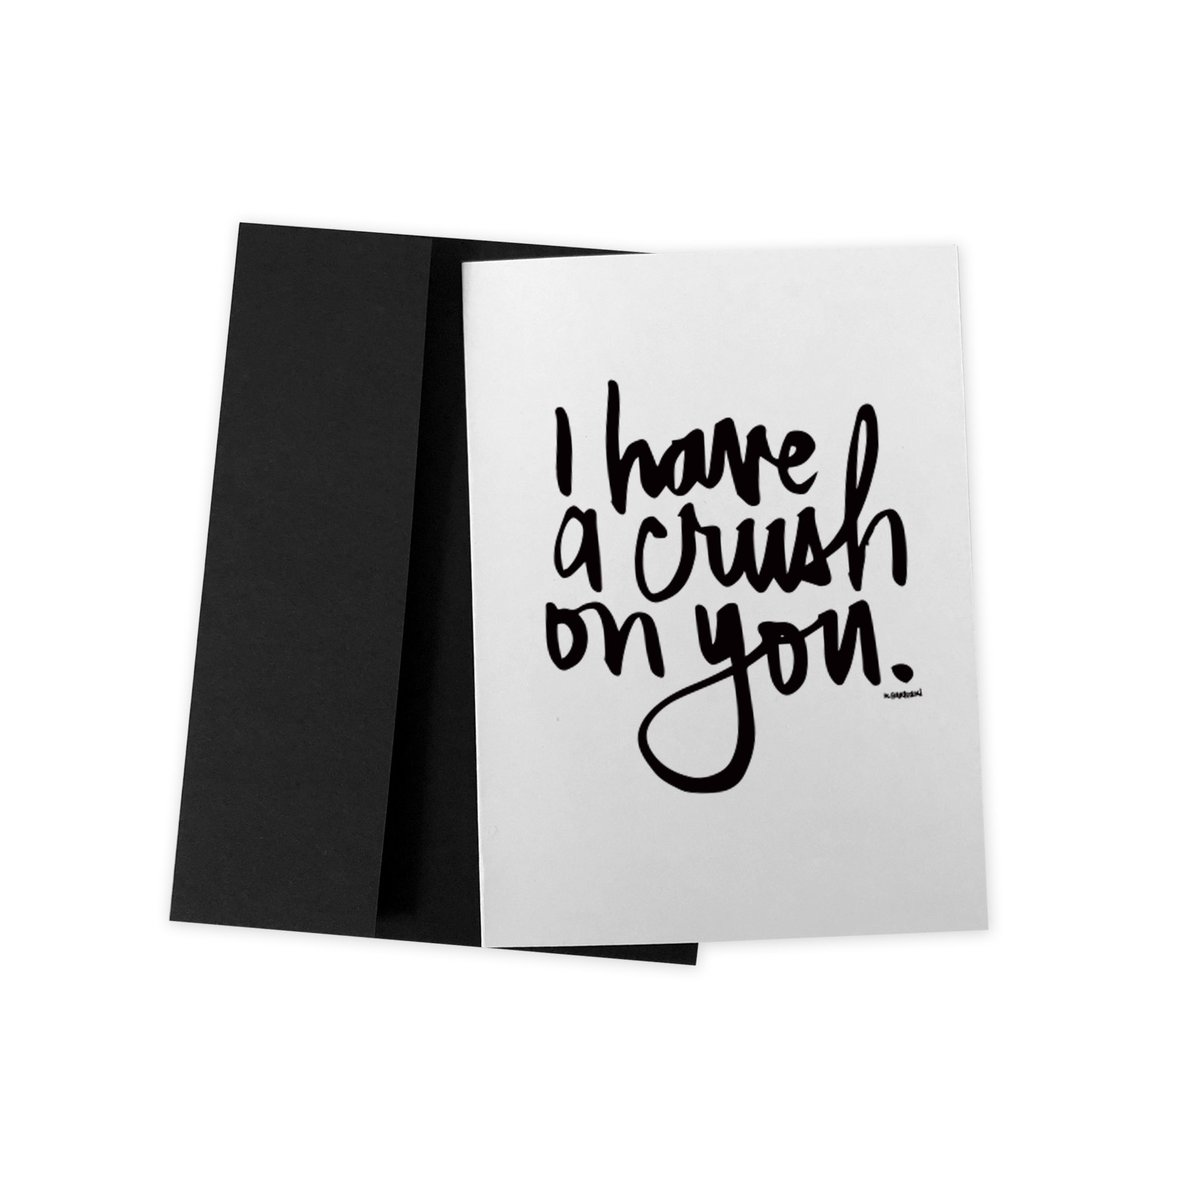 Image of I HAVE A CRUSH #kbscript greeting card